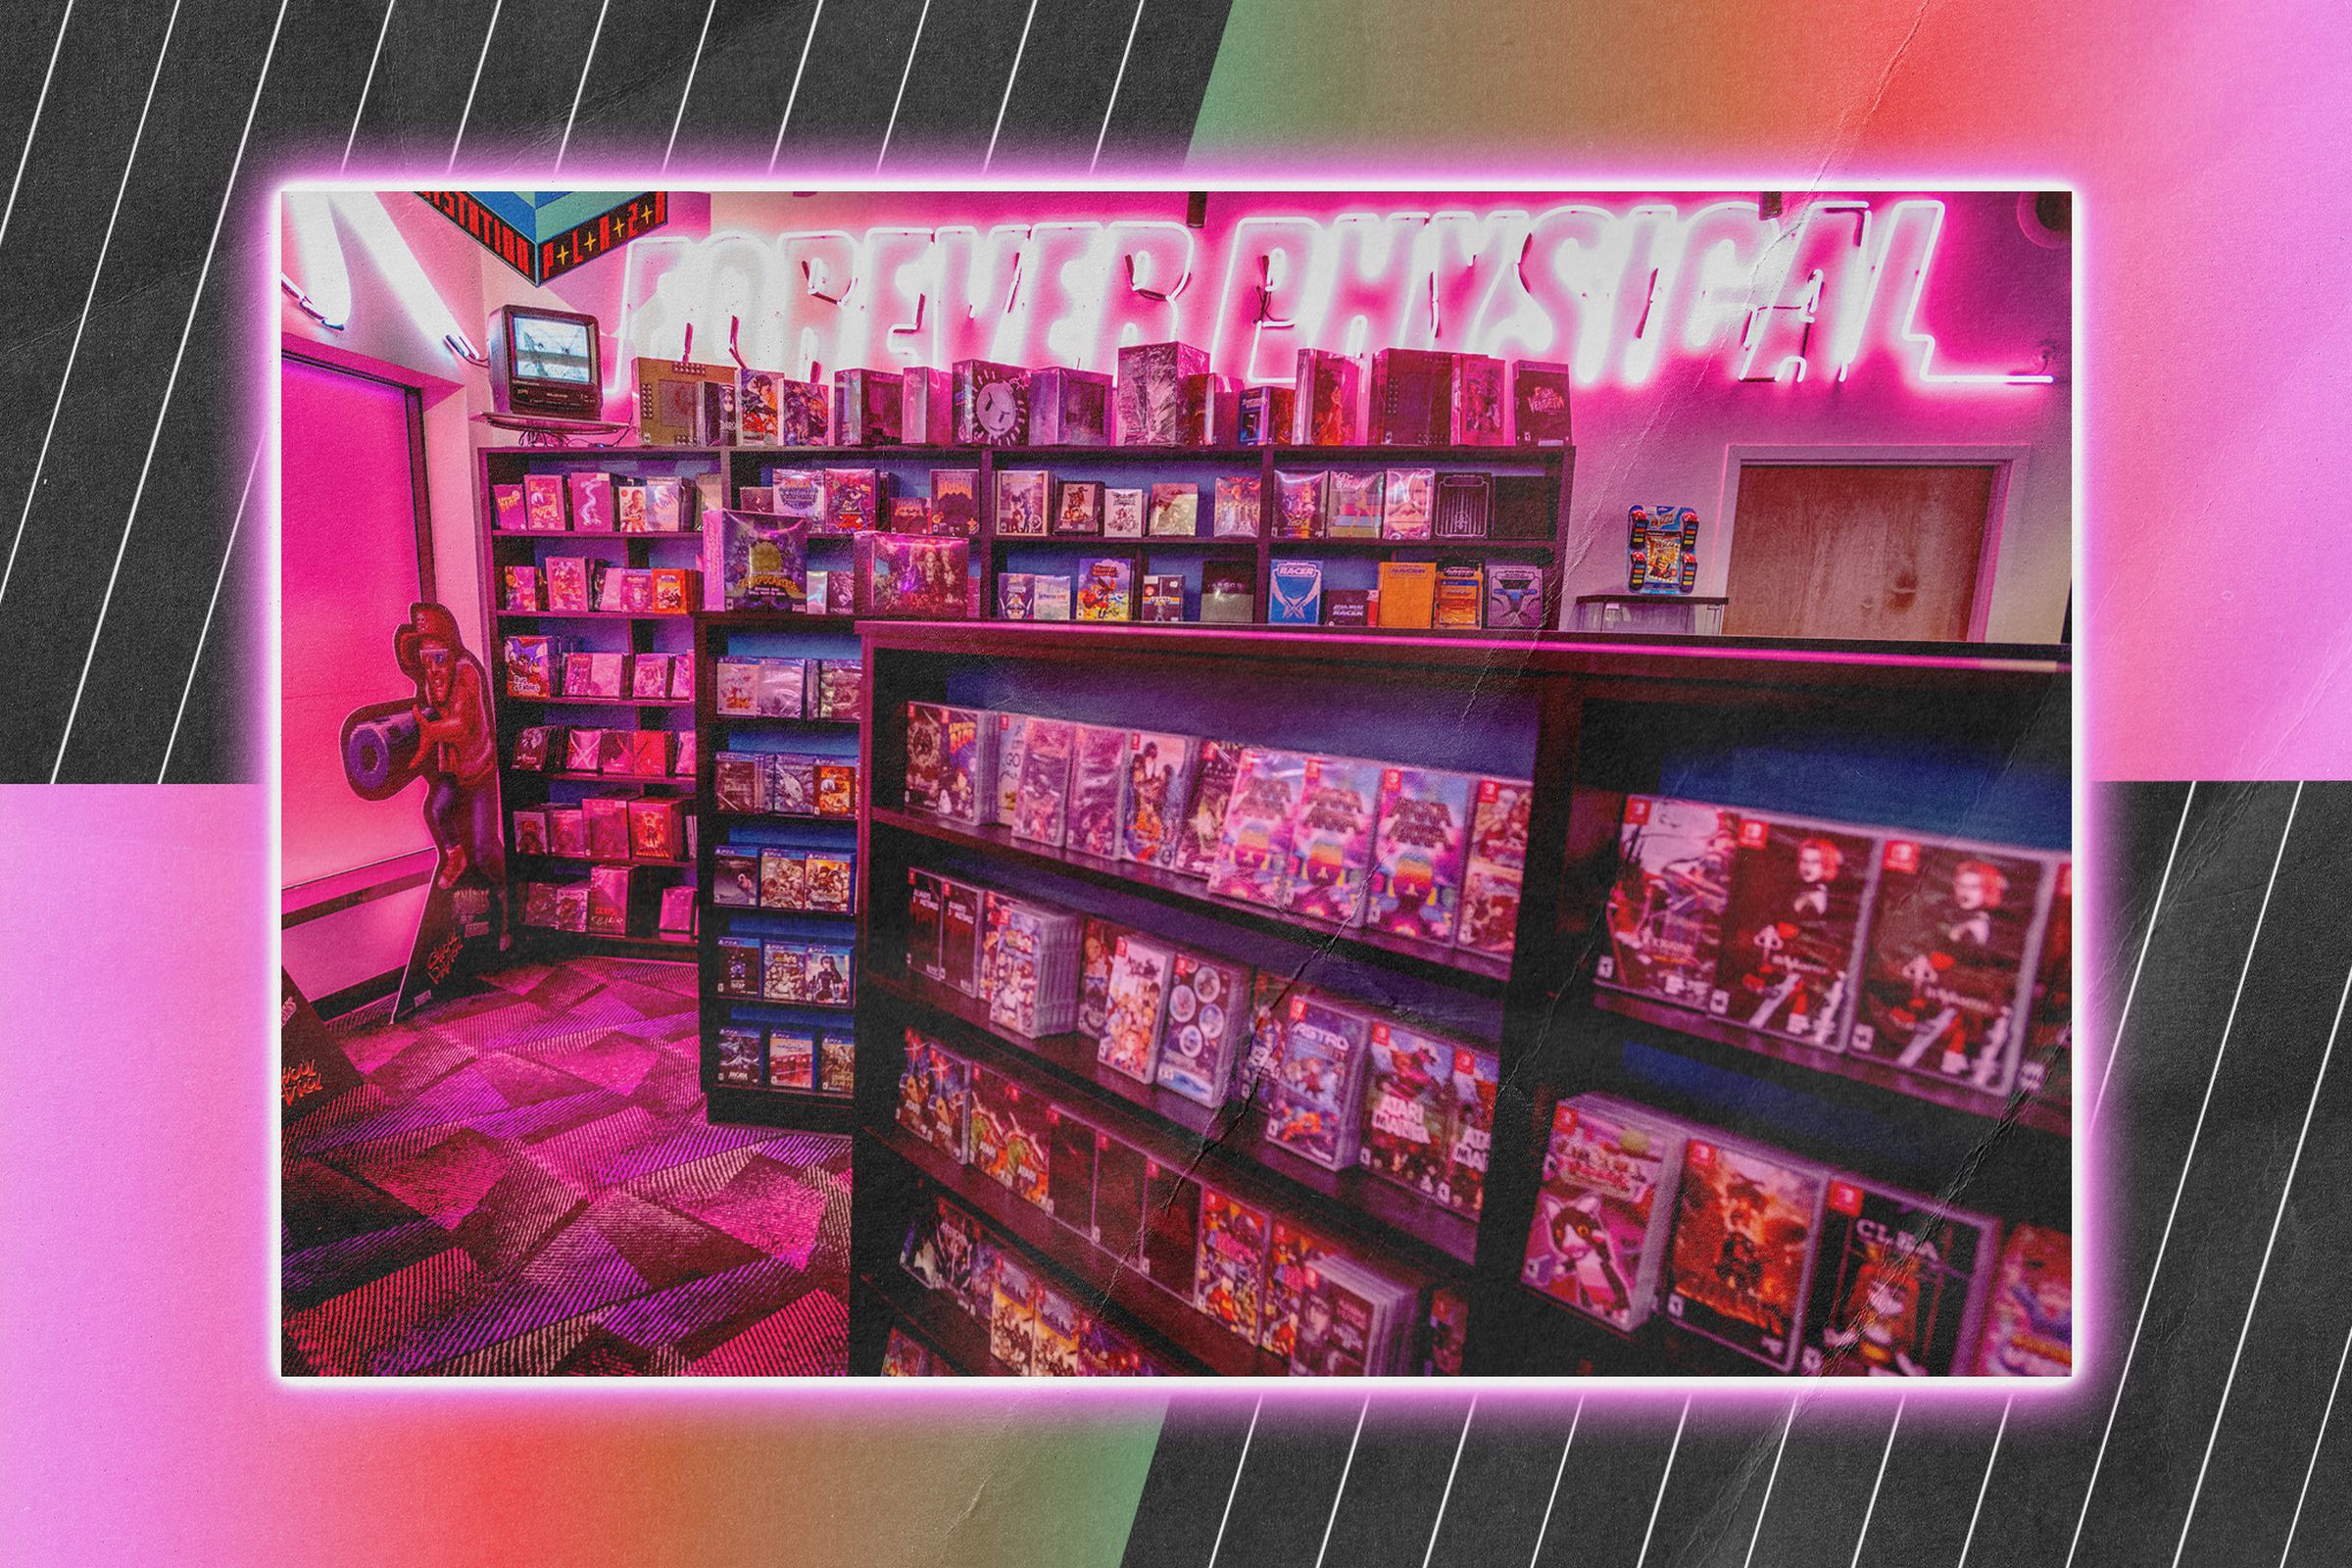 Photo in a graphic frame of Limited Run’s game store, showing shelves full of games and a pink neon sign that says “Forever Physical”.